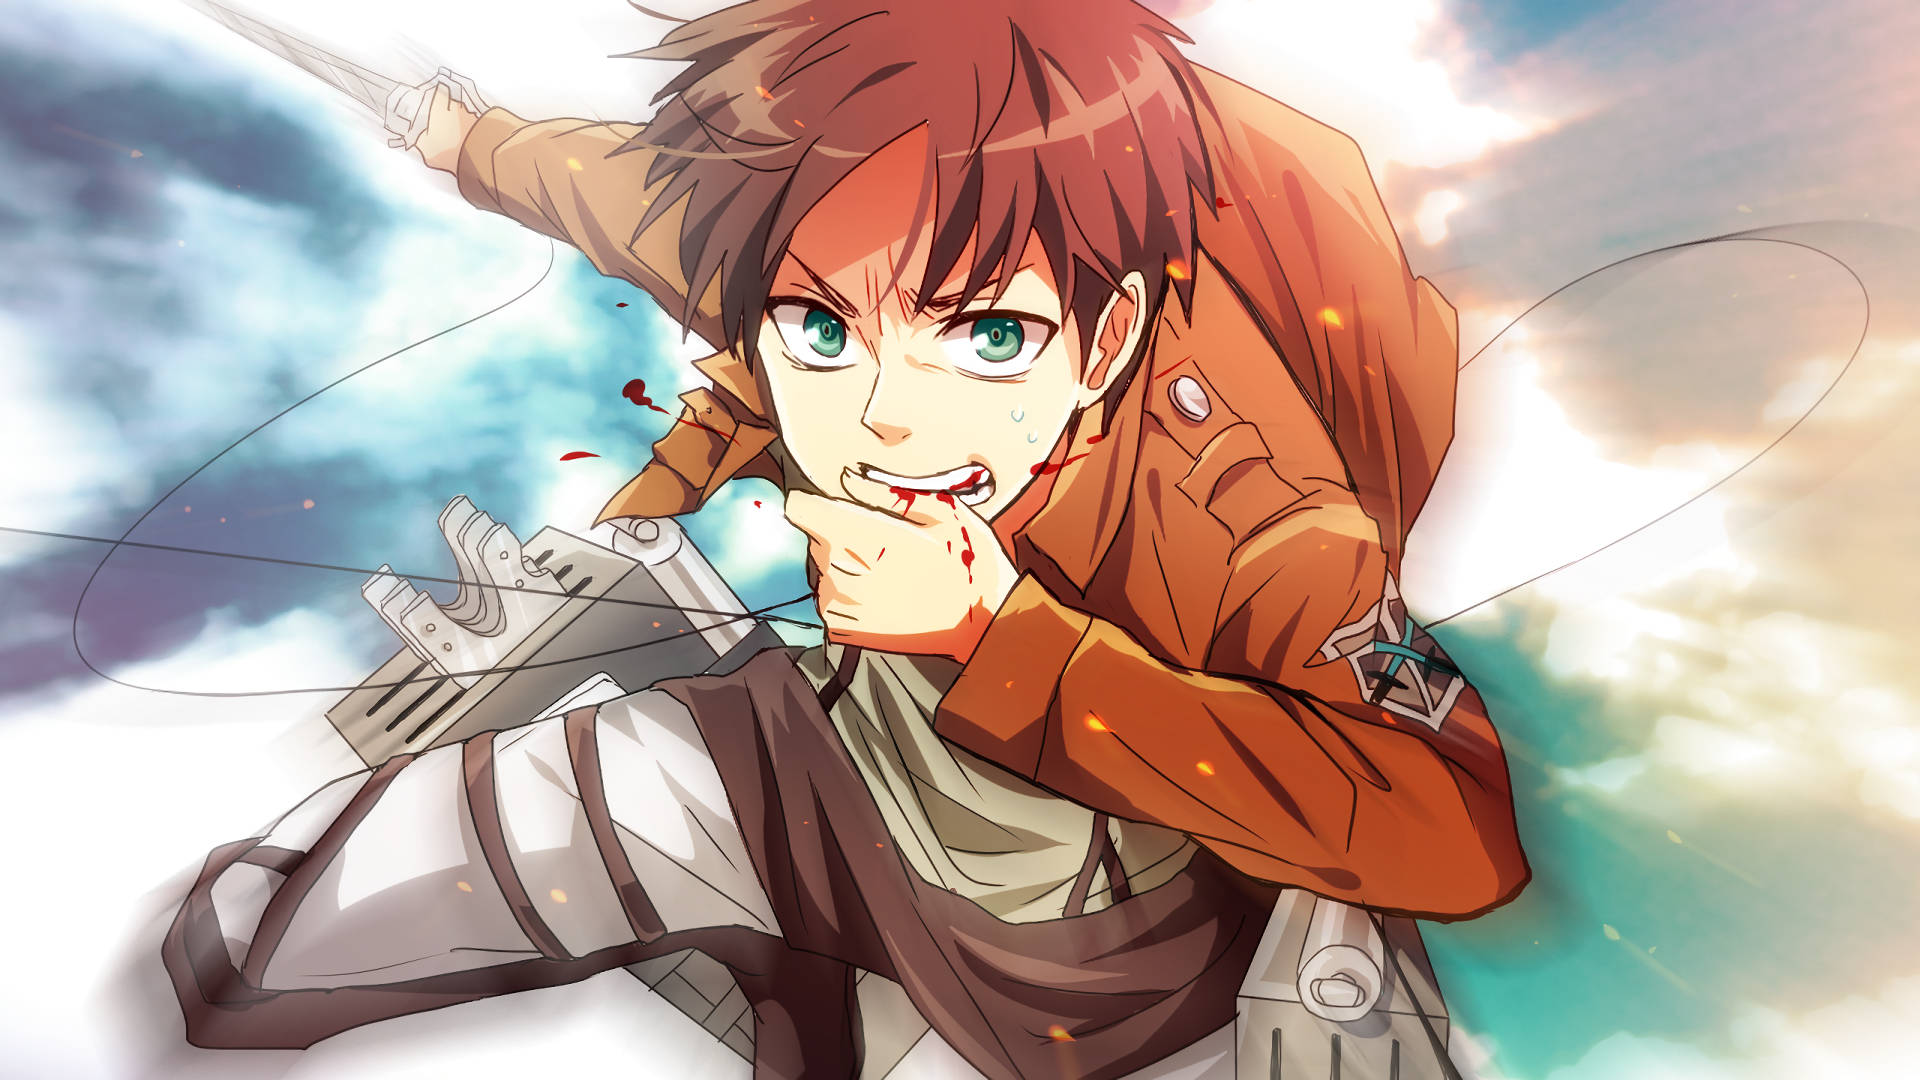 Young Eren Yeager Biting His Hand Background